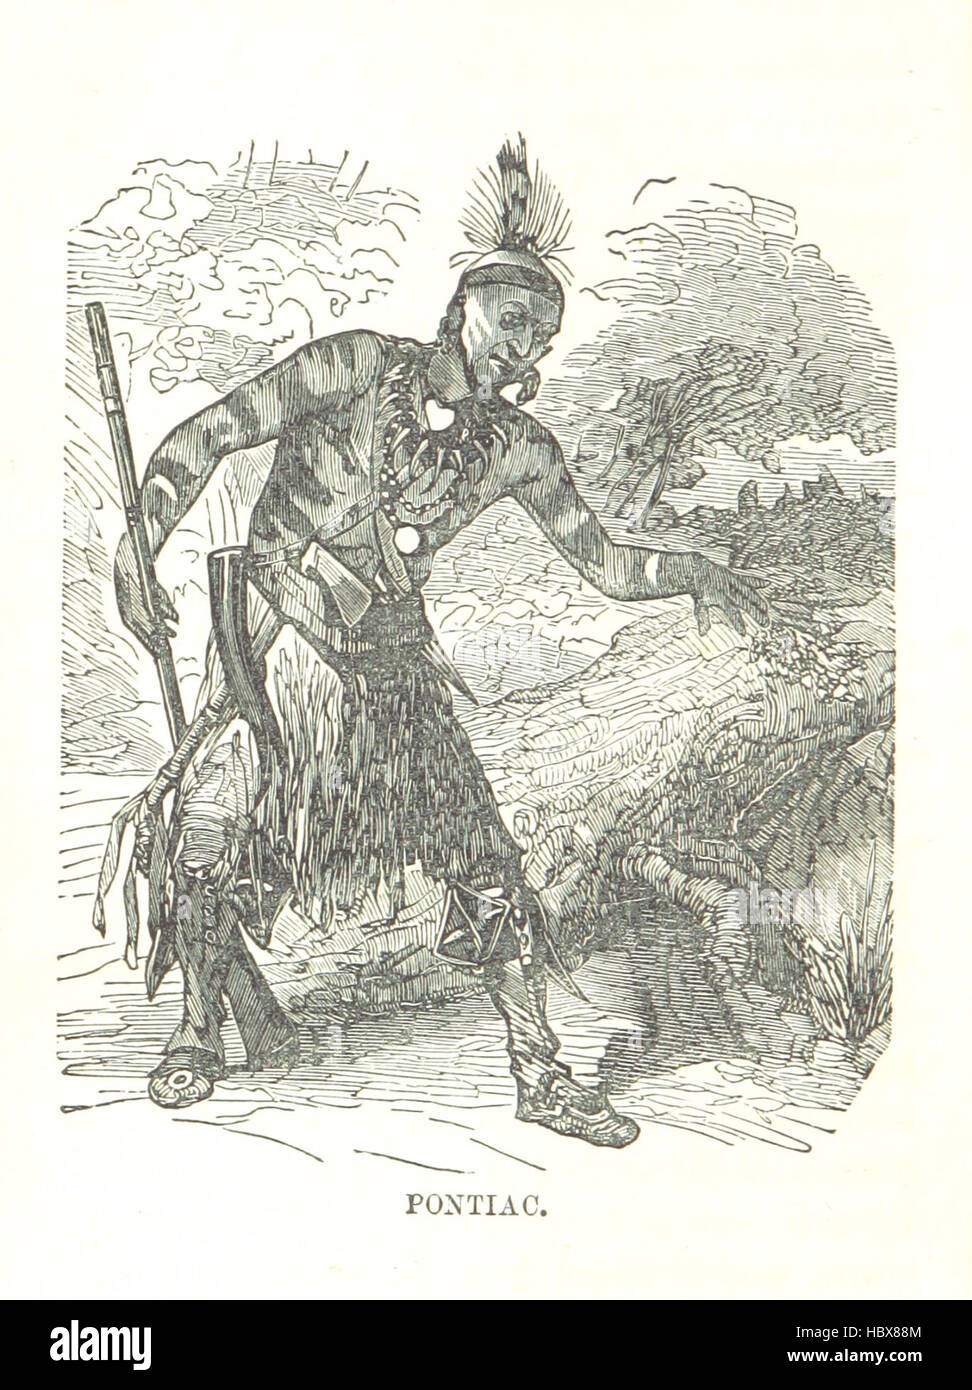 Image taken from page 230 of 'Illustrated Historical Sketches of the Indians, exhibiting their manners and customs on the battle field, and in the Wigwam ... From the best authorities' Image taken from page 230 of 'Illustrated Historical Sketches of Stock Photo